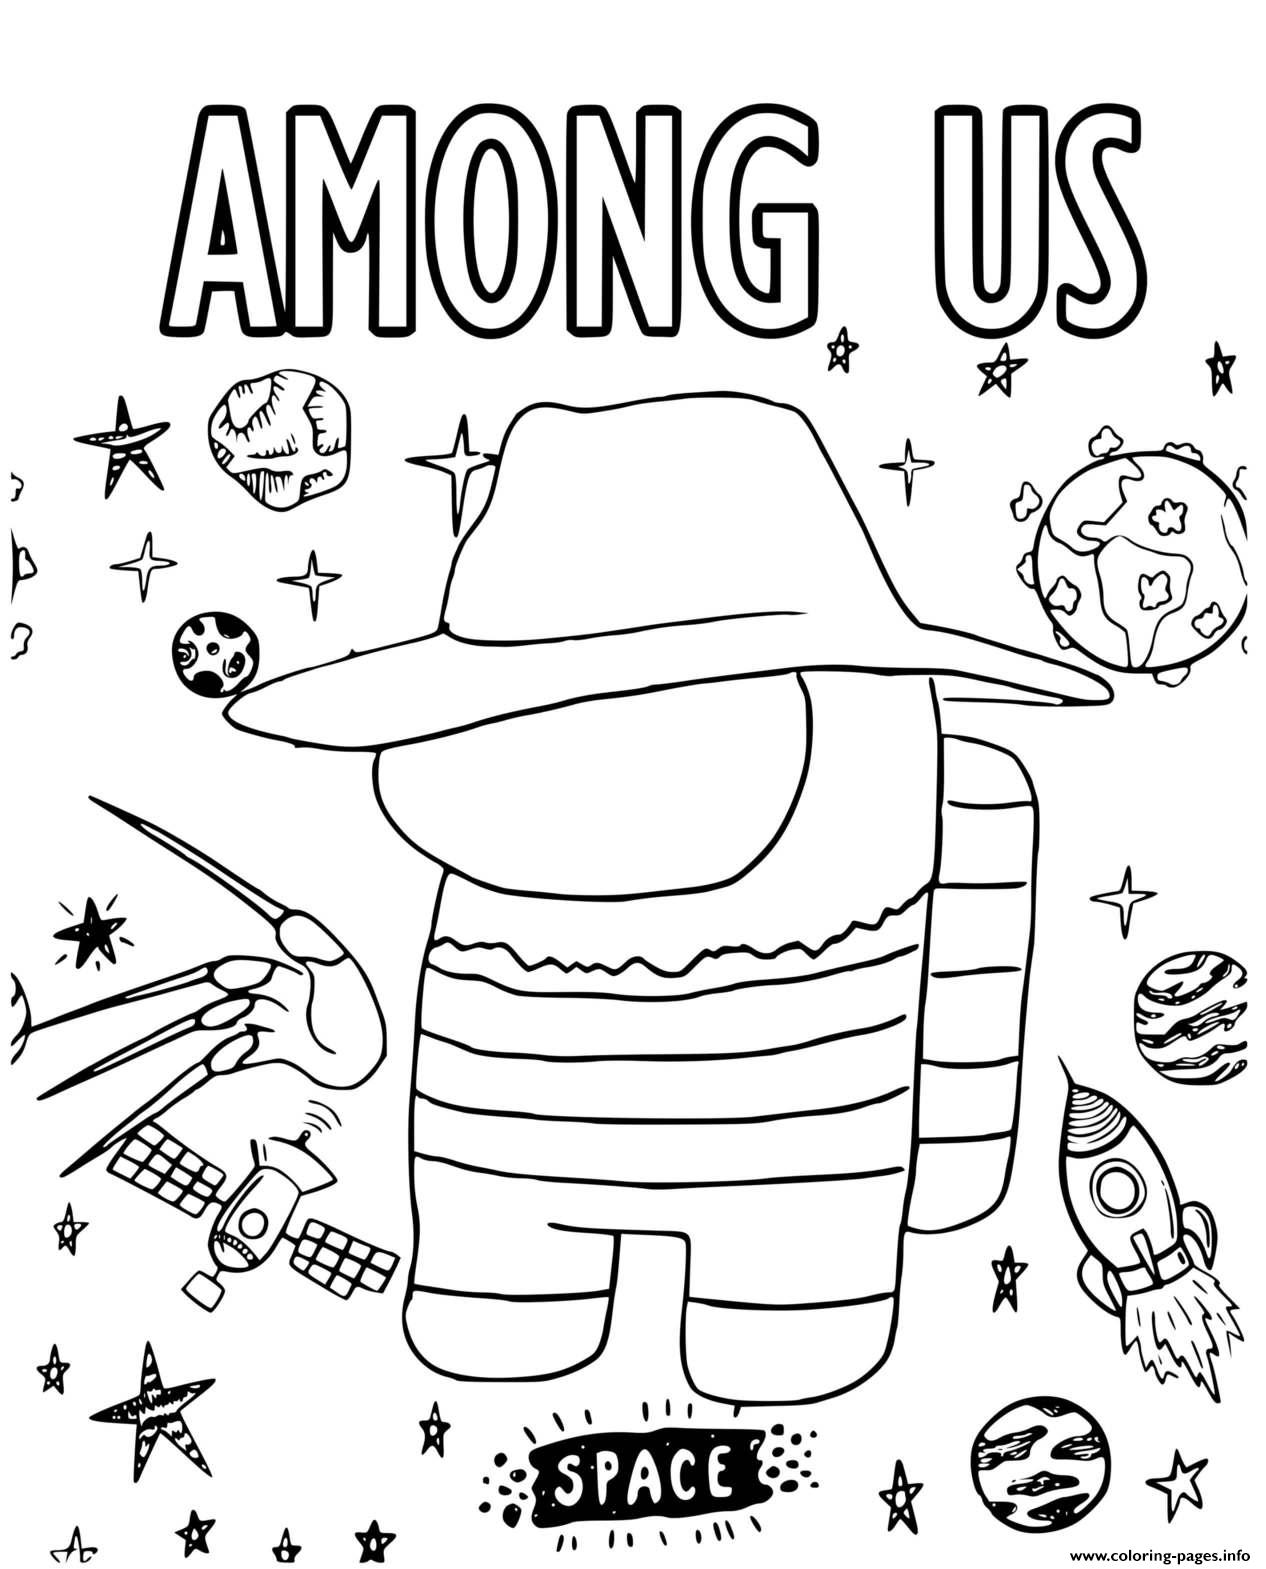 Freddy Krueger Among Us Coloring Pages Printable